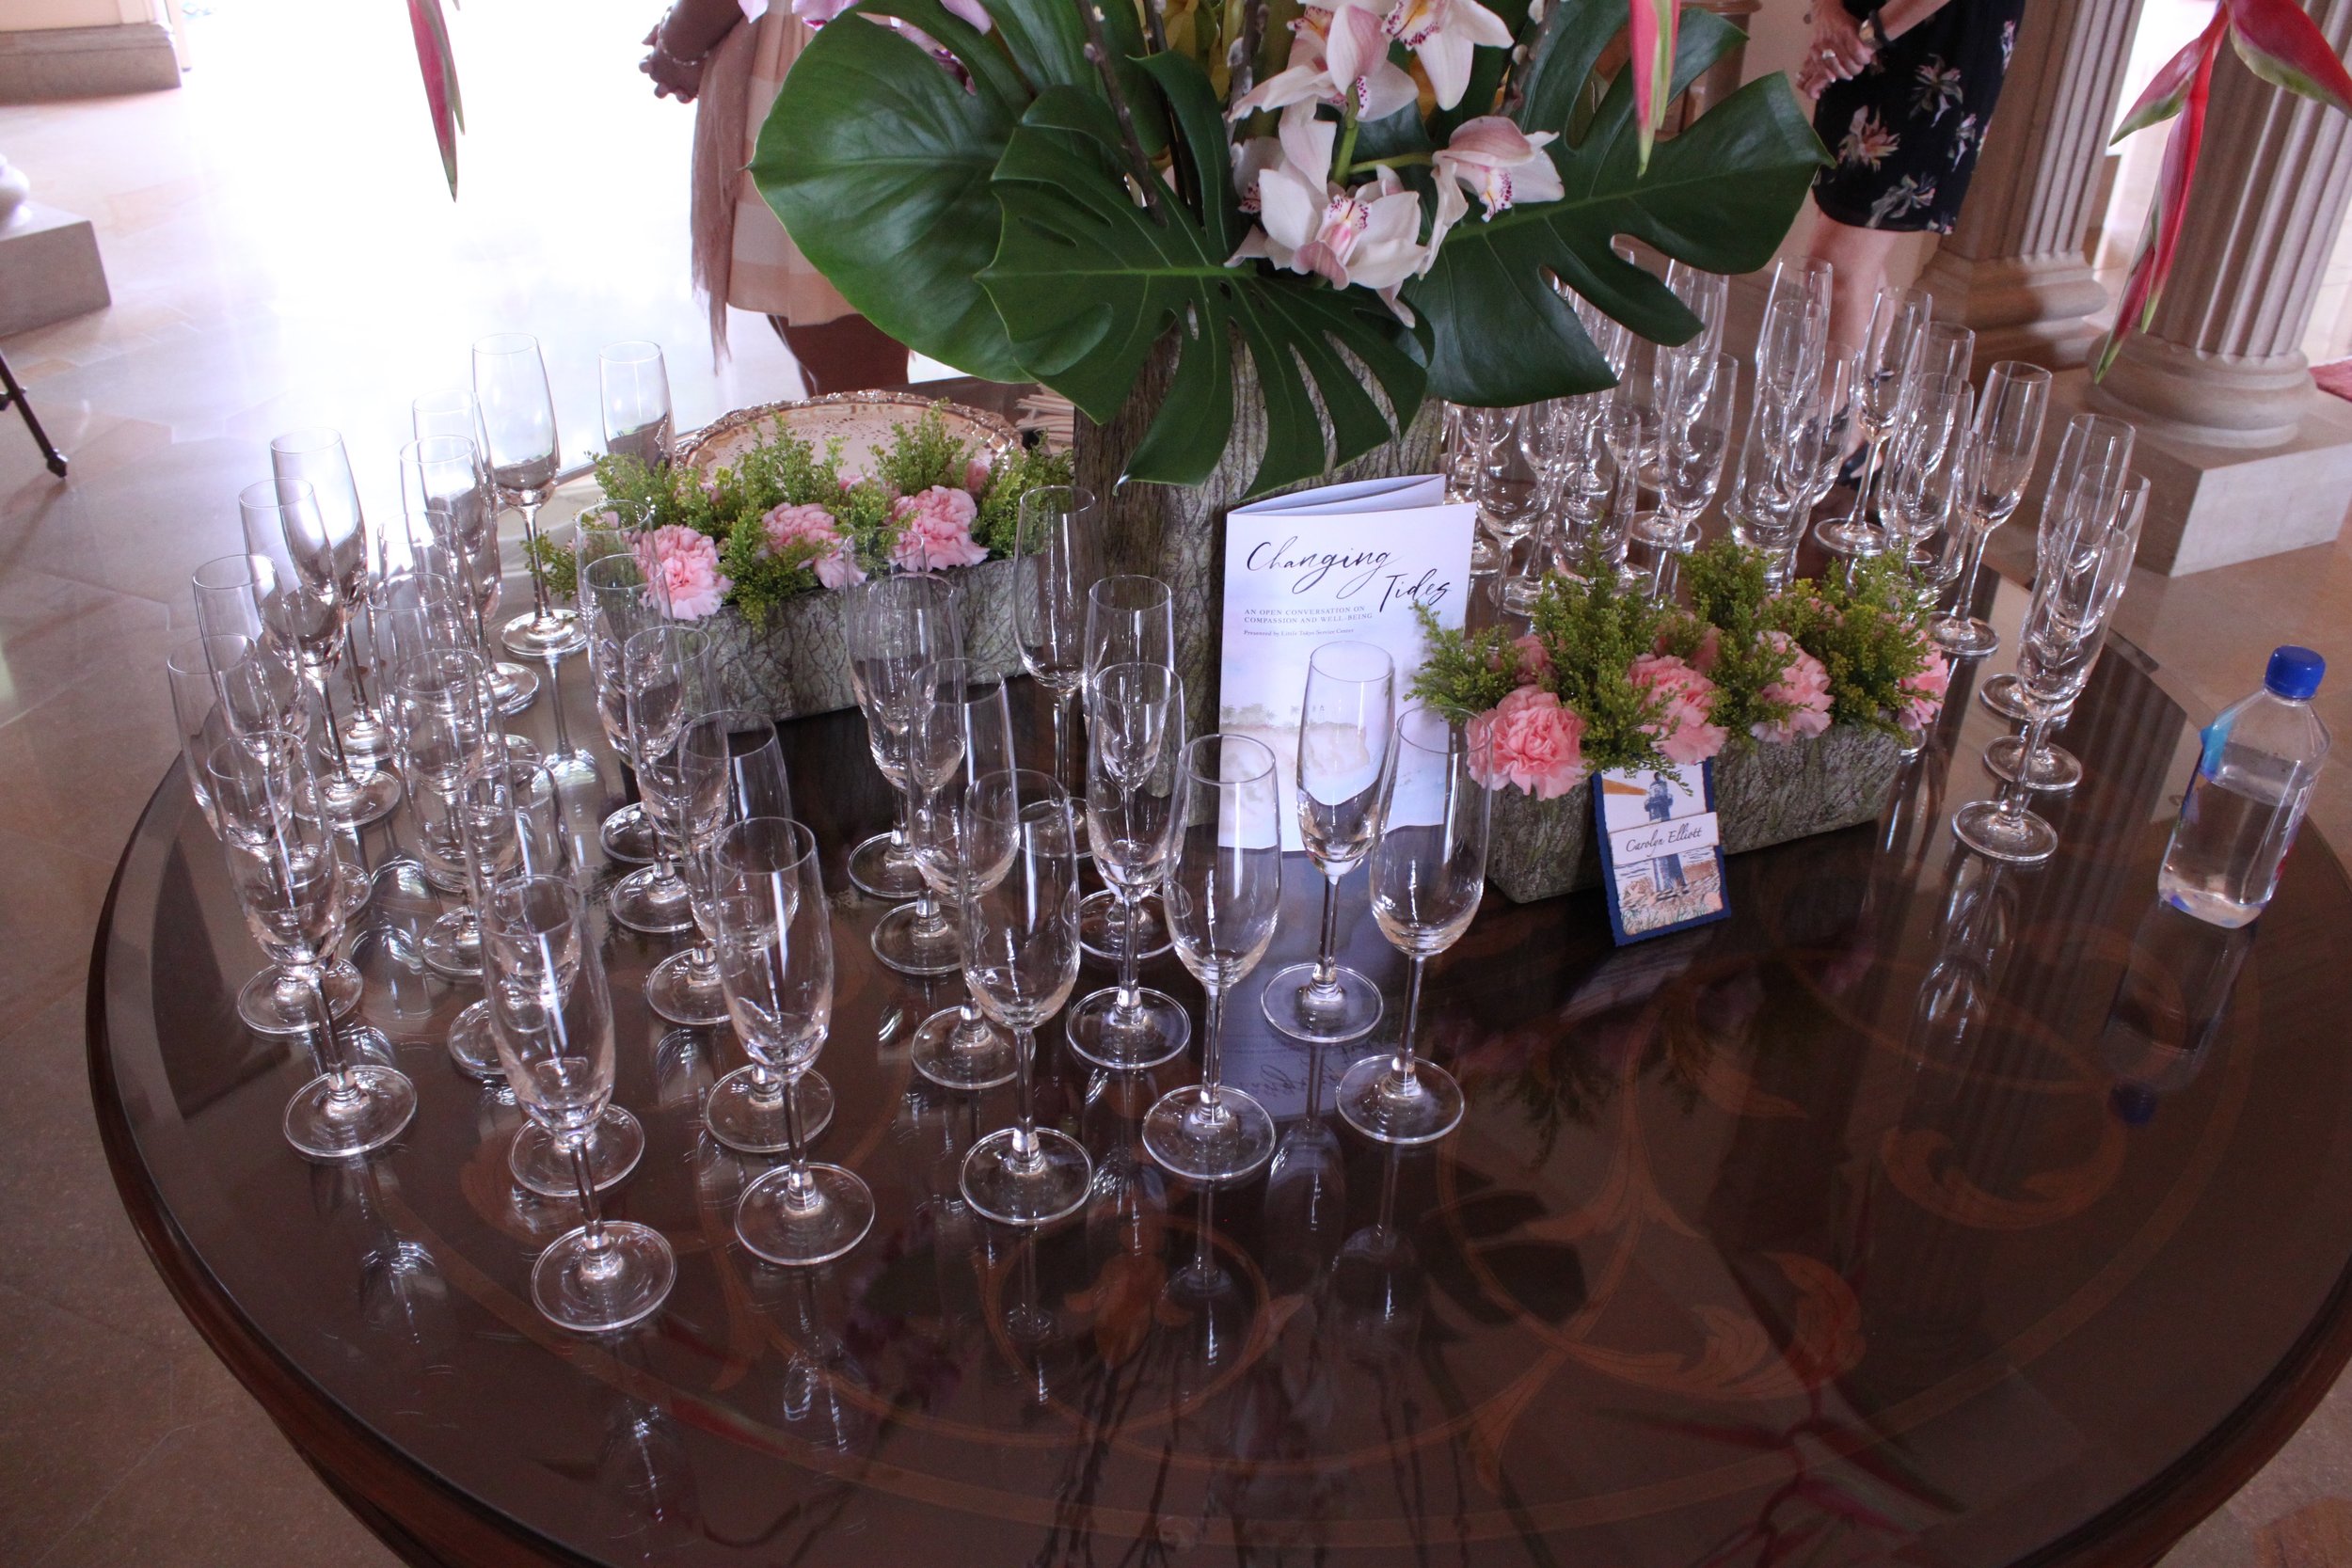 A group of champagne flutes rest on a table.